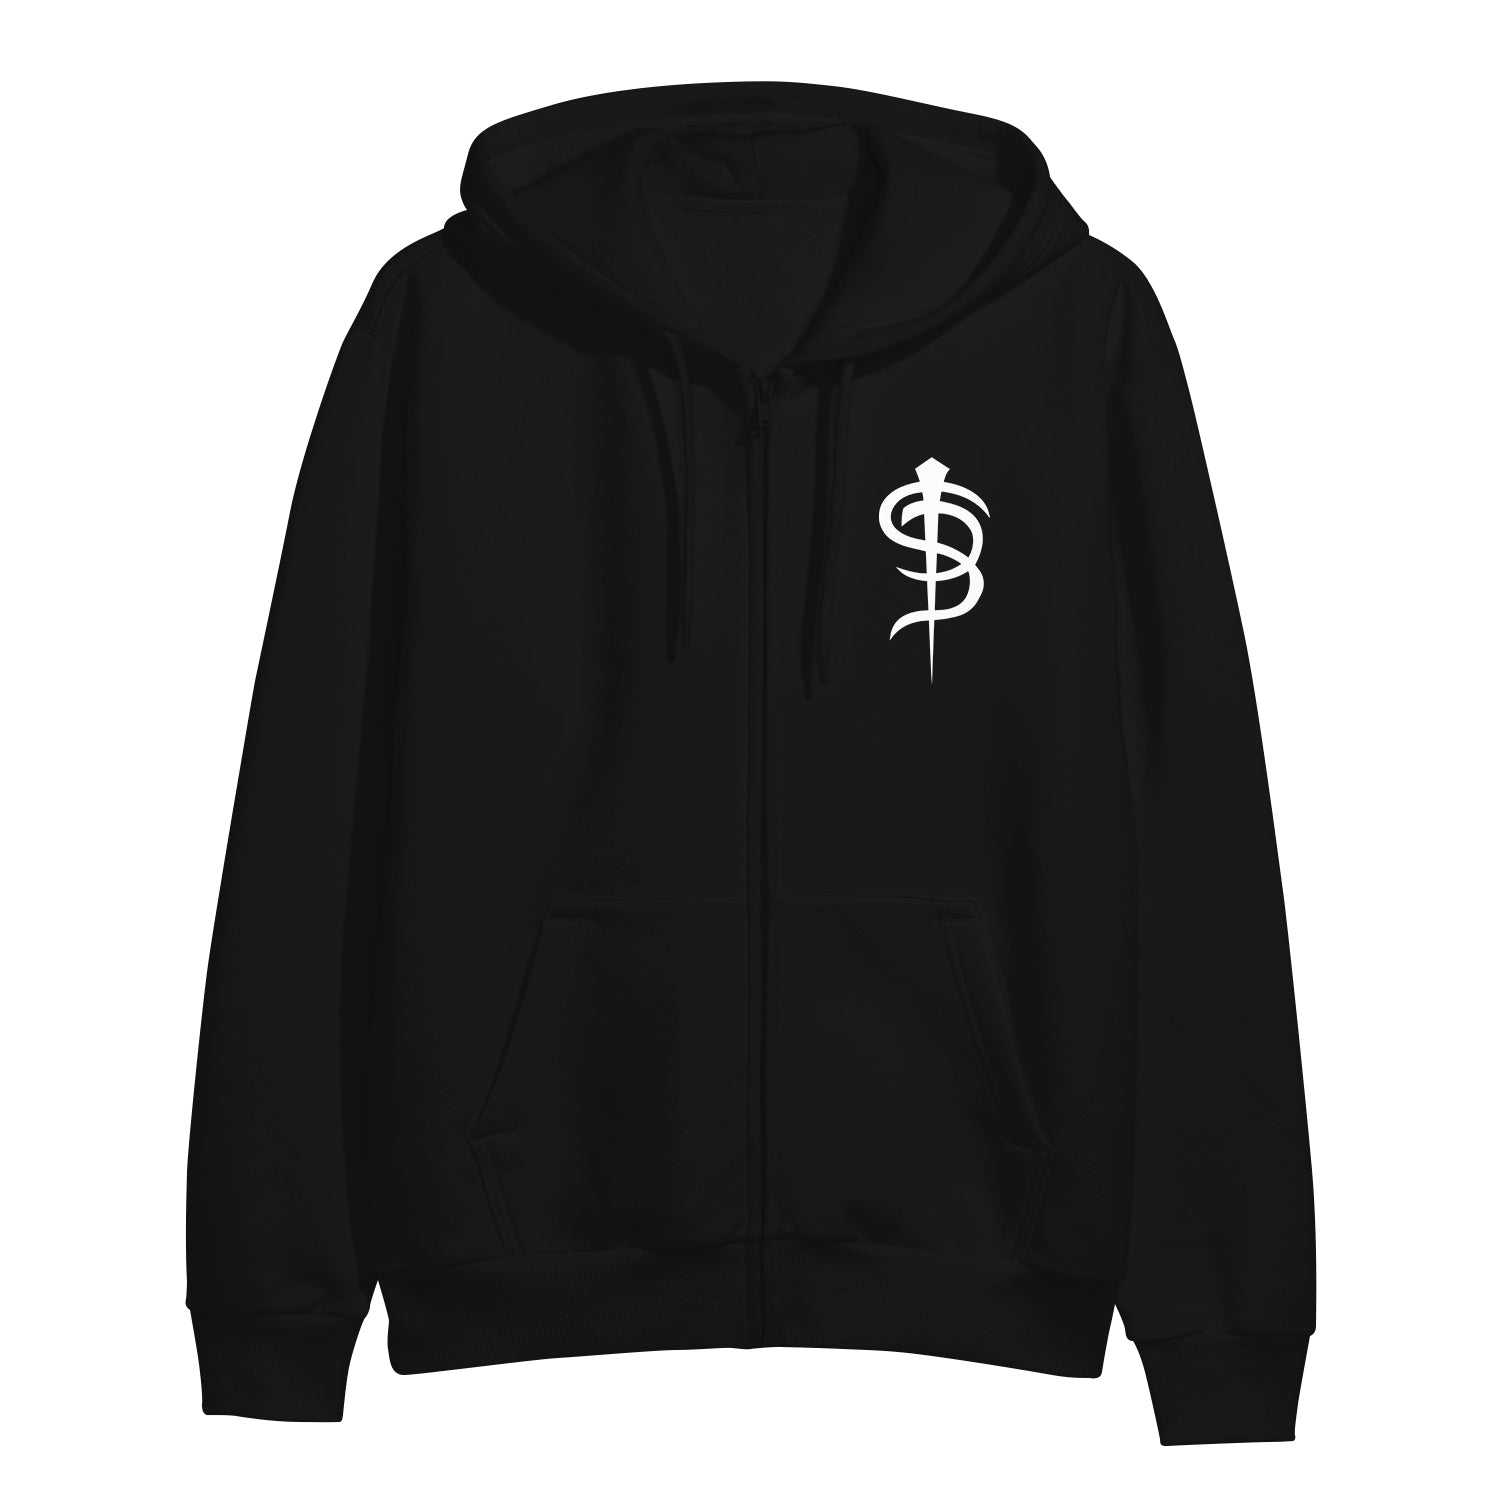 Image of the front Black hooded sweatshirt on a white background. The front of the hoodie on the left chest is the skinny puppy SP logo in white. 